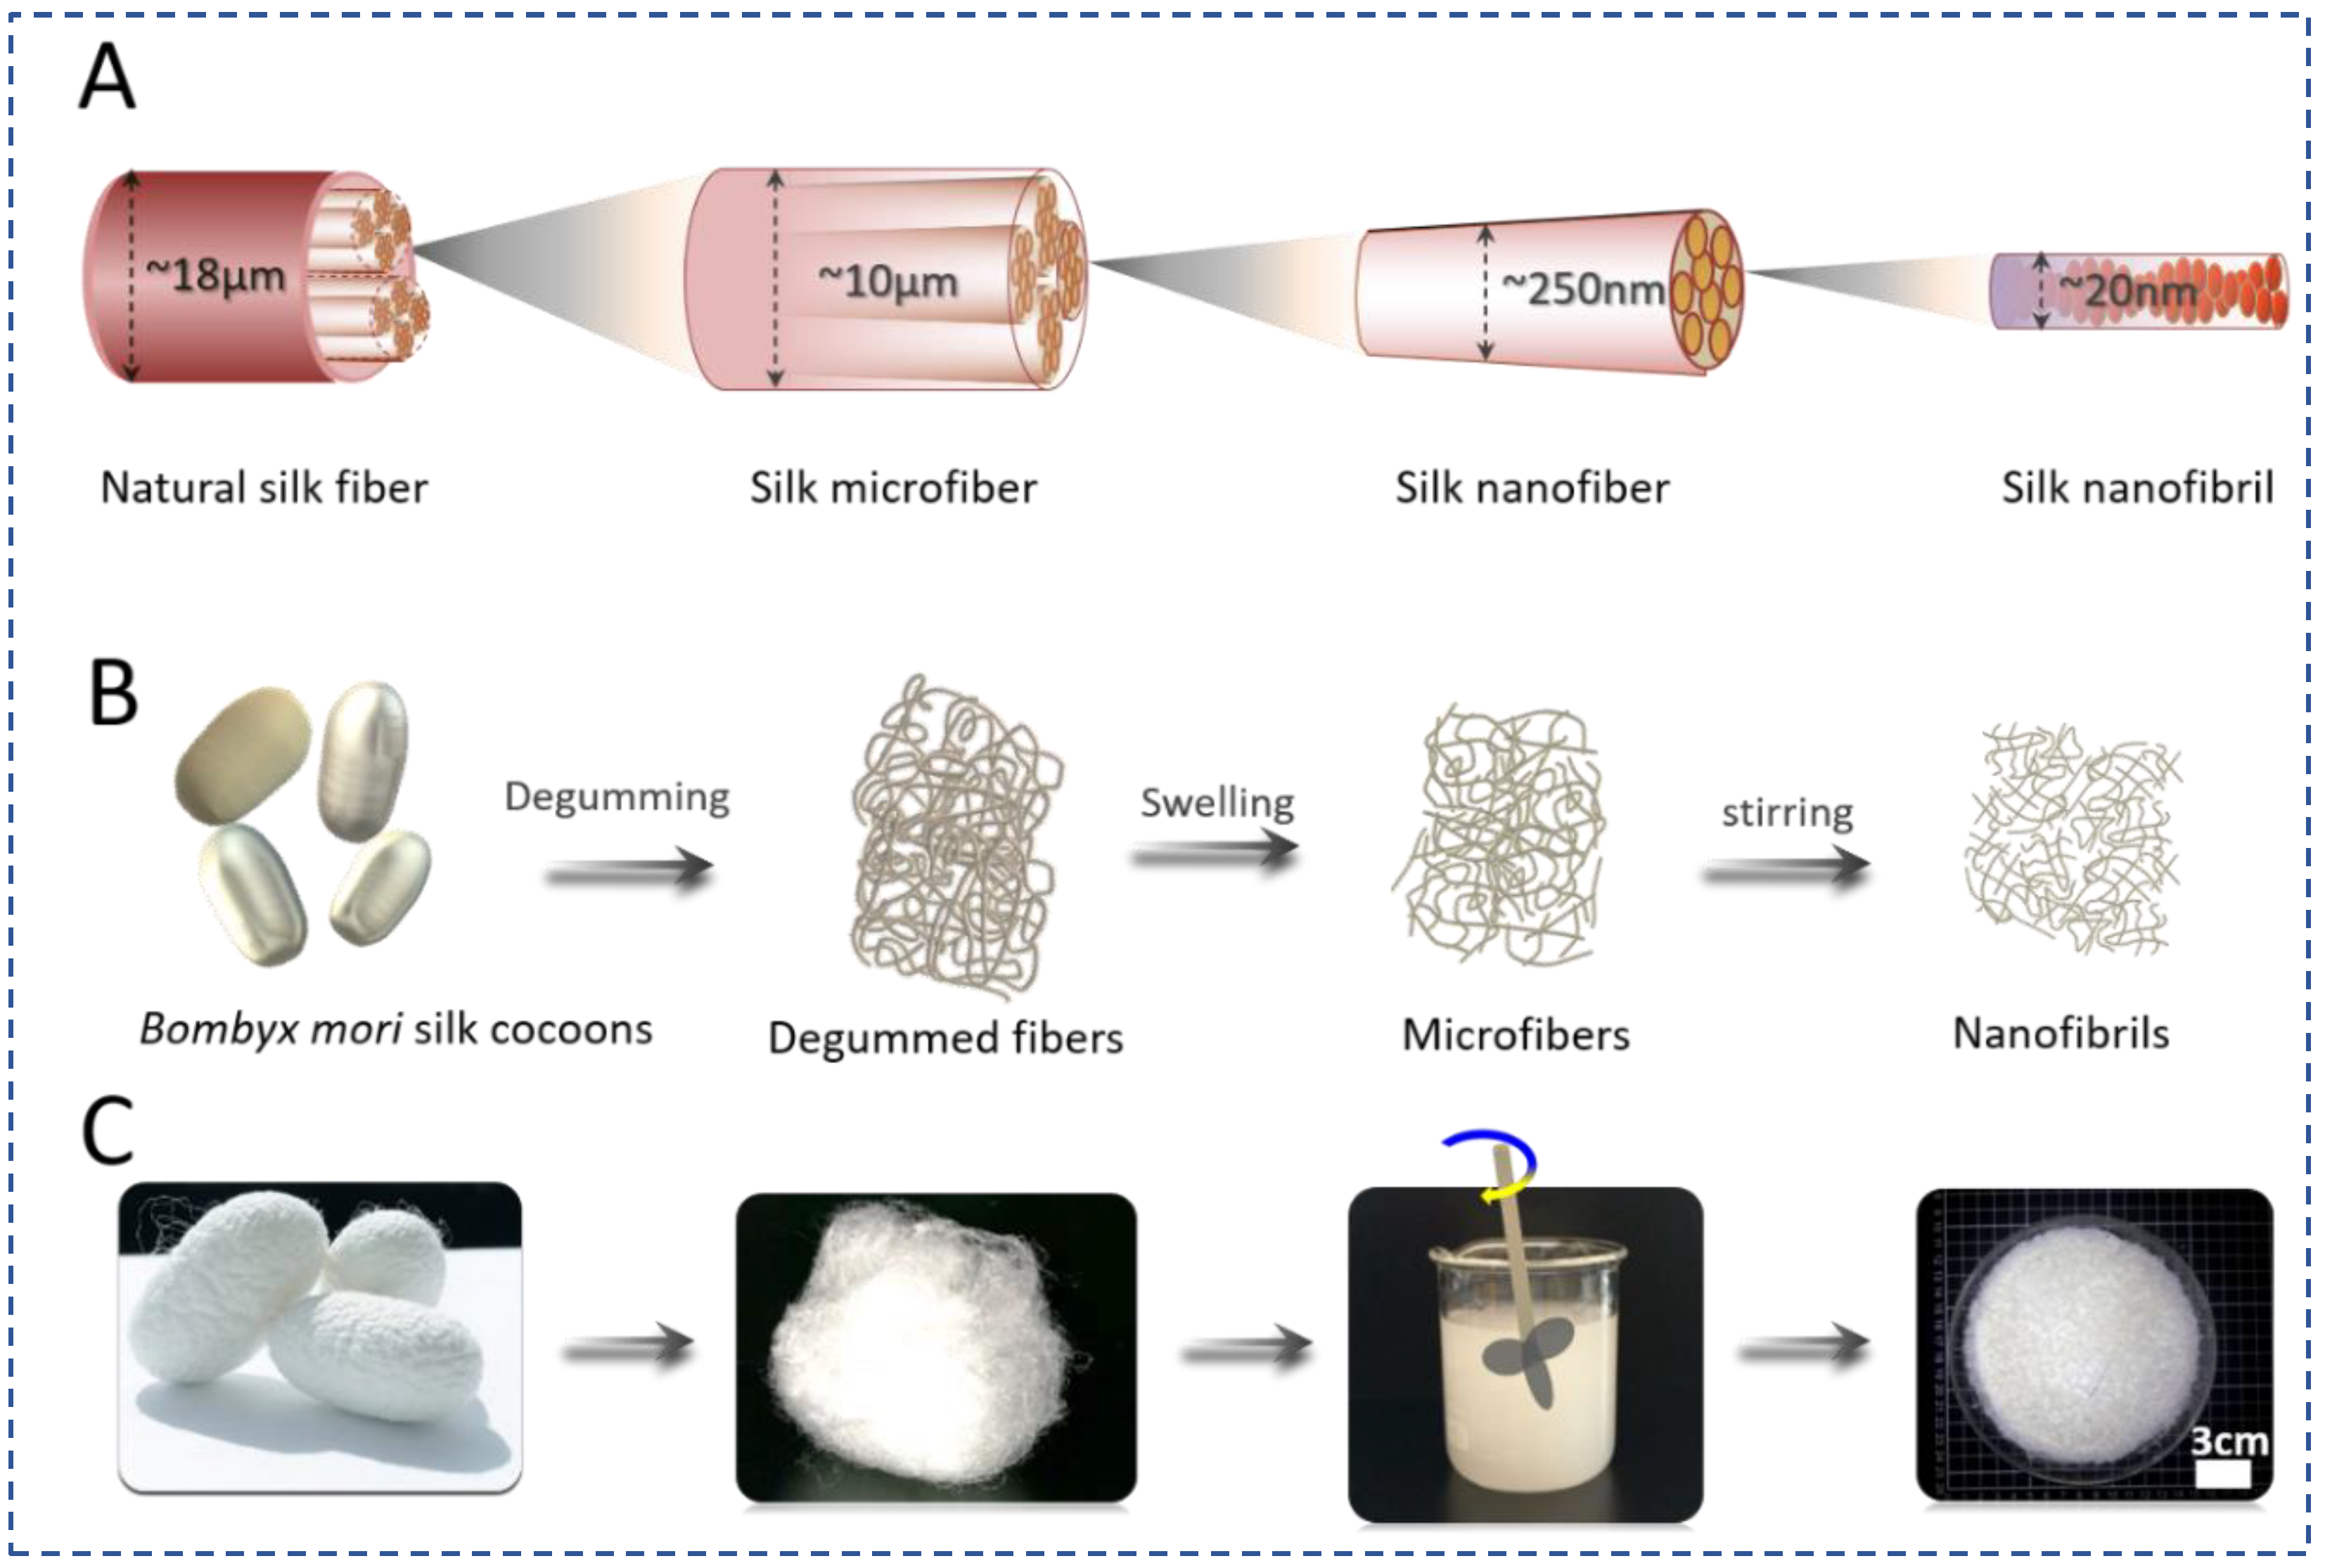 The effect of ageing on the mechanical properties of the silk of